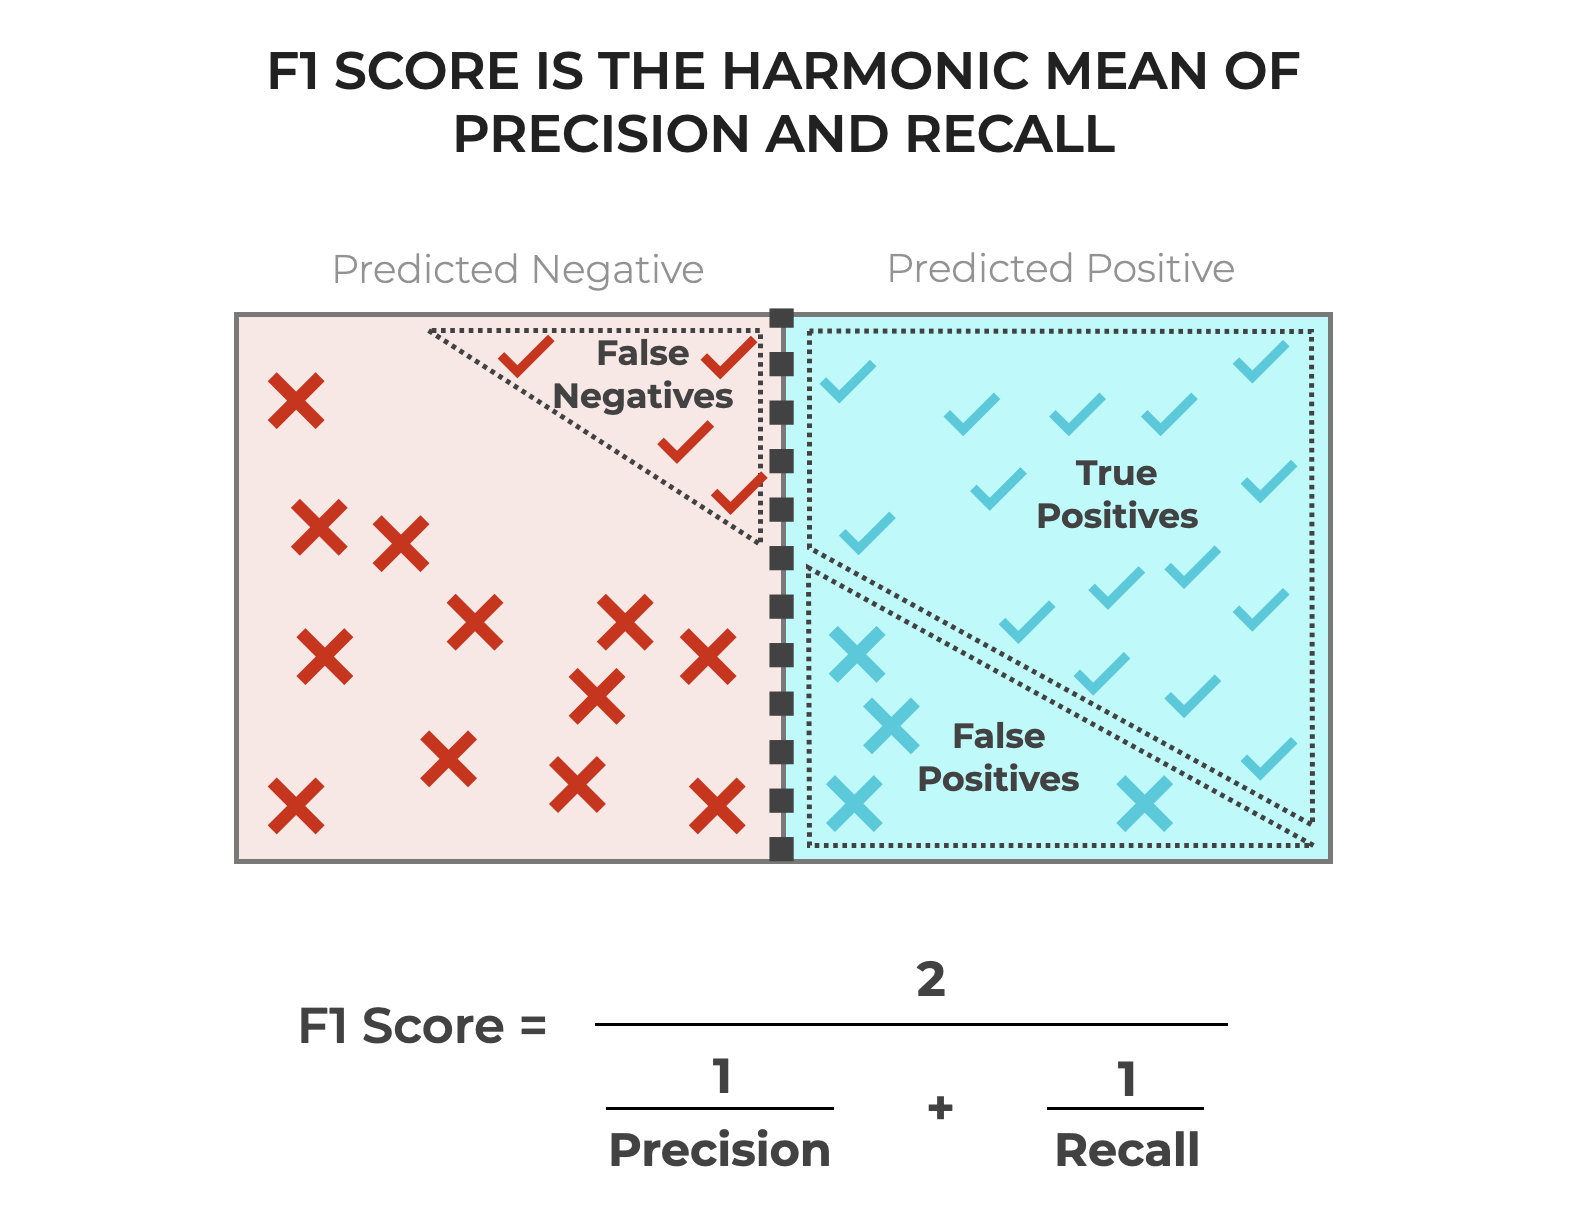 An image that shows F1 score as the harmonic mean of precision and recall.